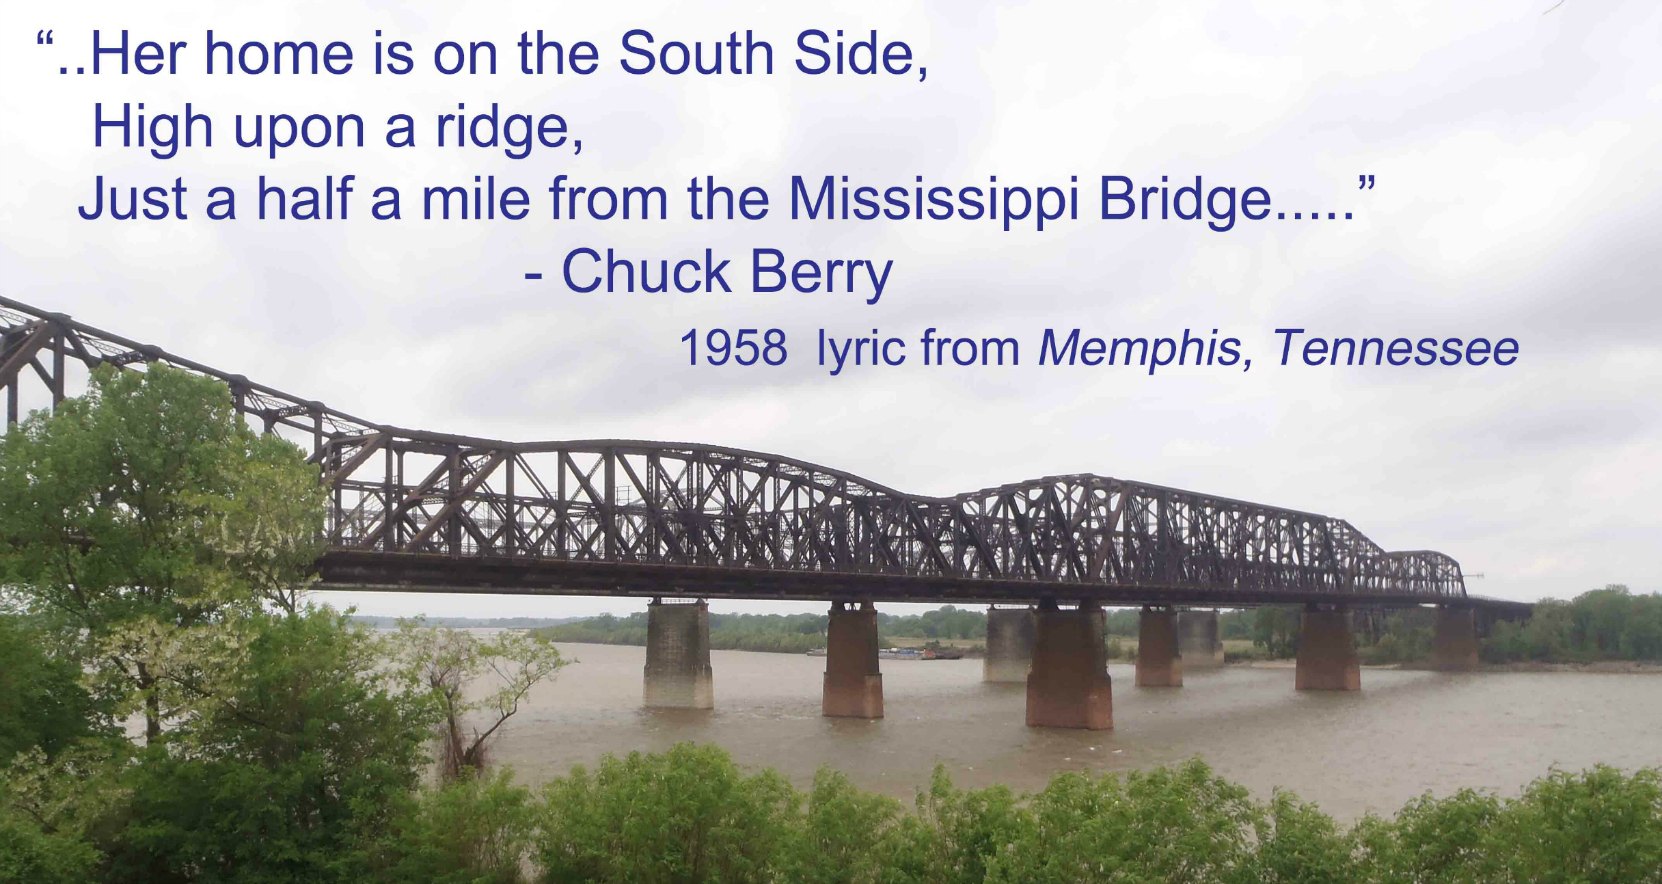 The Mississippi Bridge from Chuck Berry's 1958 hit, Memphis, Tennessee. "Her home is on the south side, high upon a ridge, Just a half a mile from the Mississippi Bridge